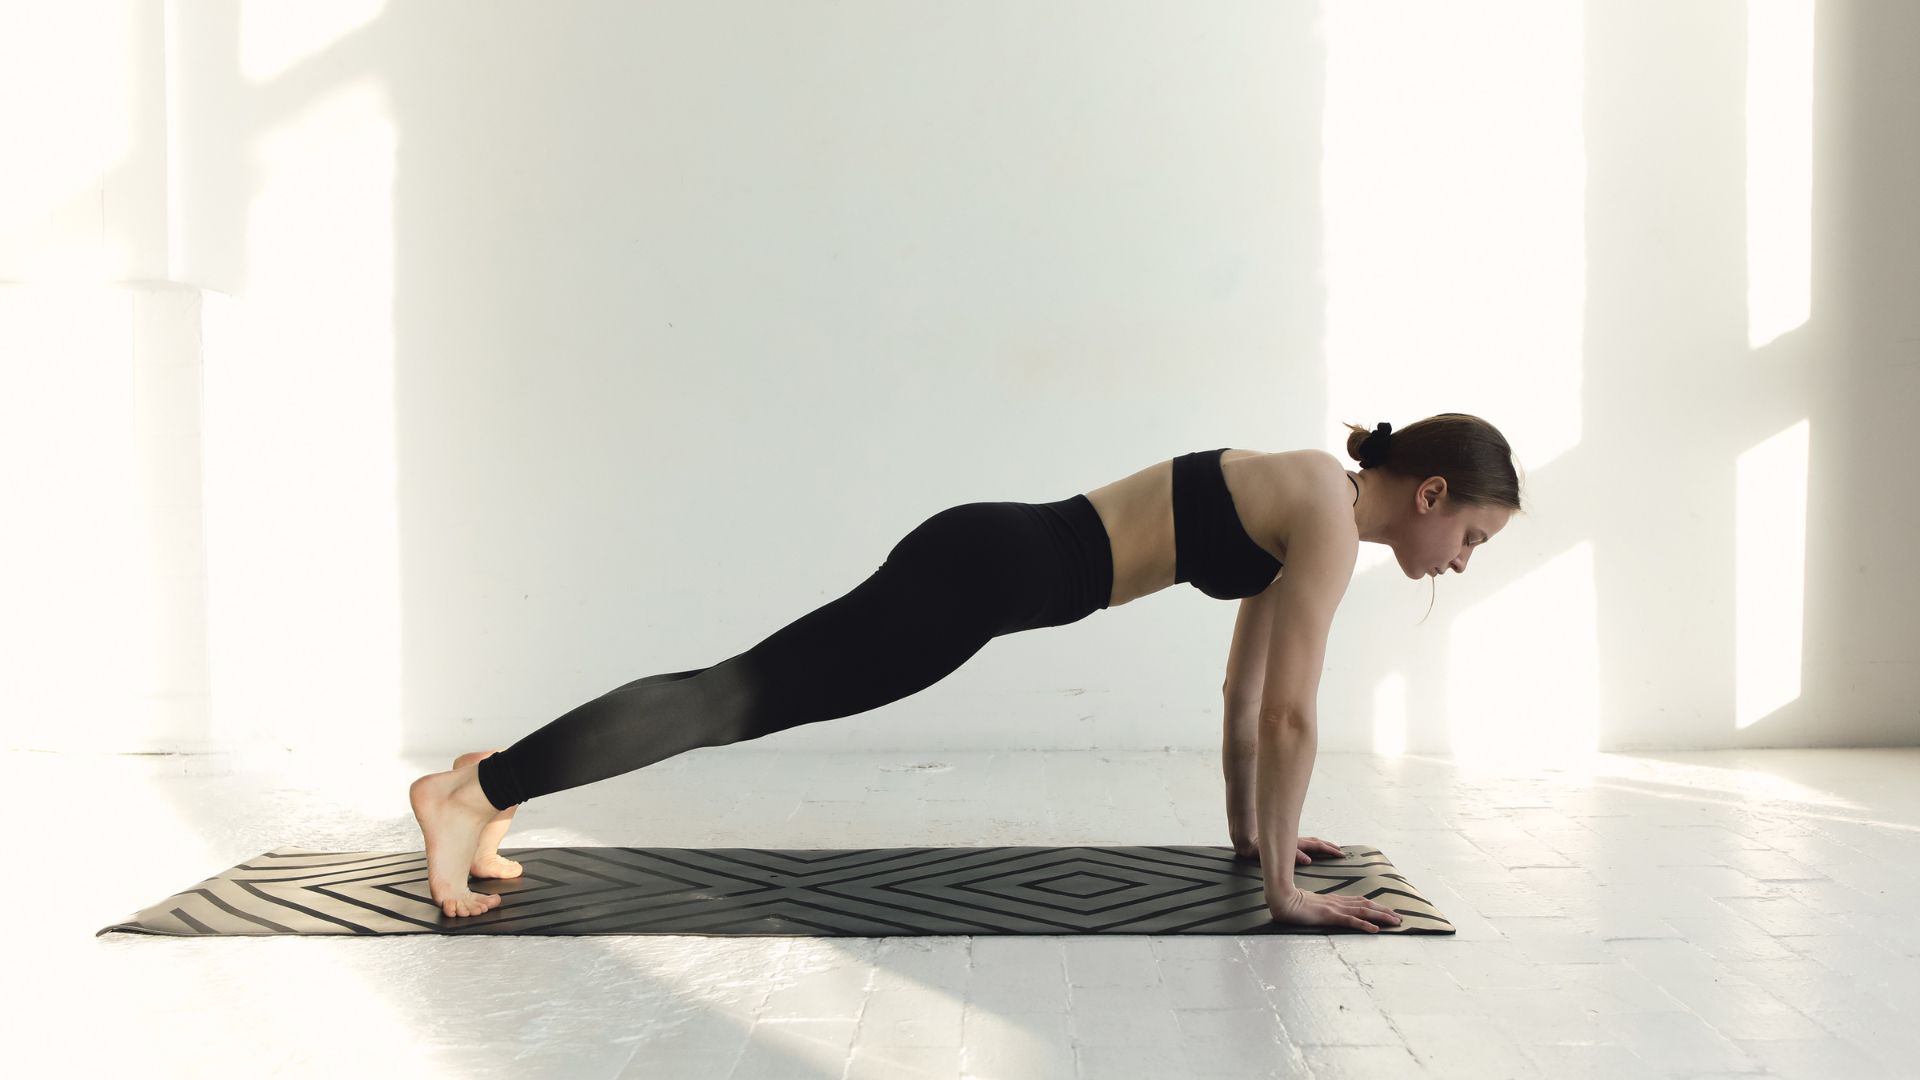 Can Push-Ups Reduce Your Breast Size? (Explained)